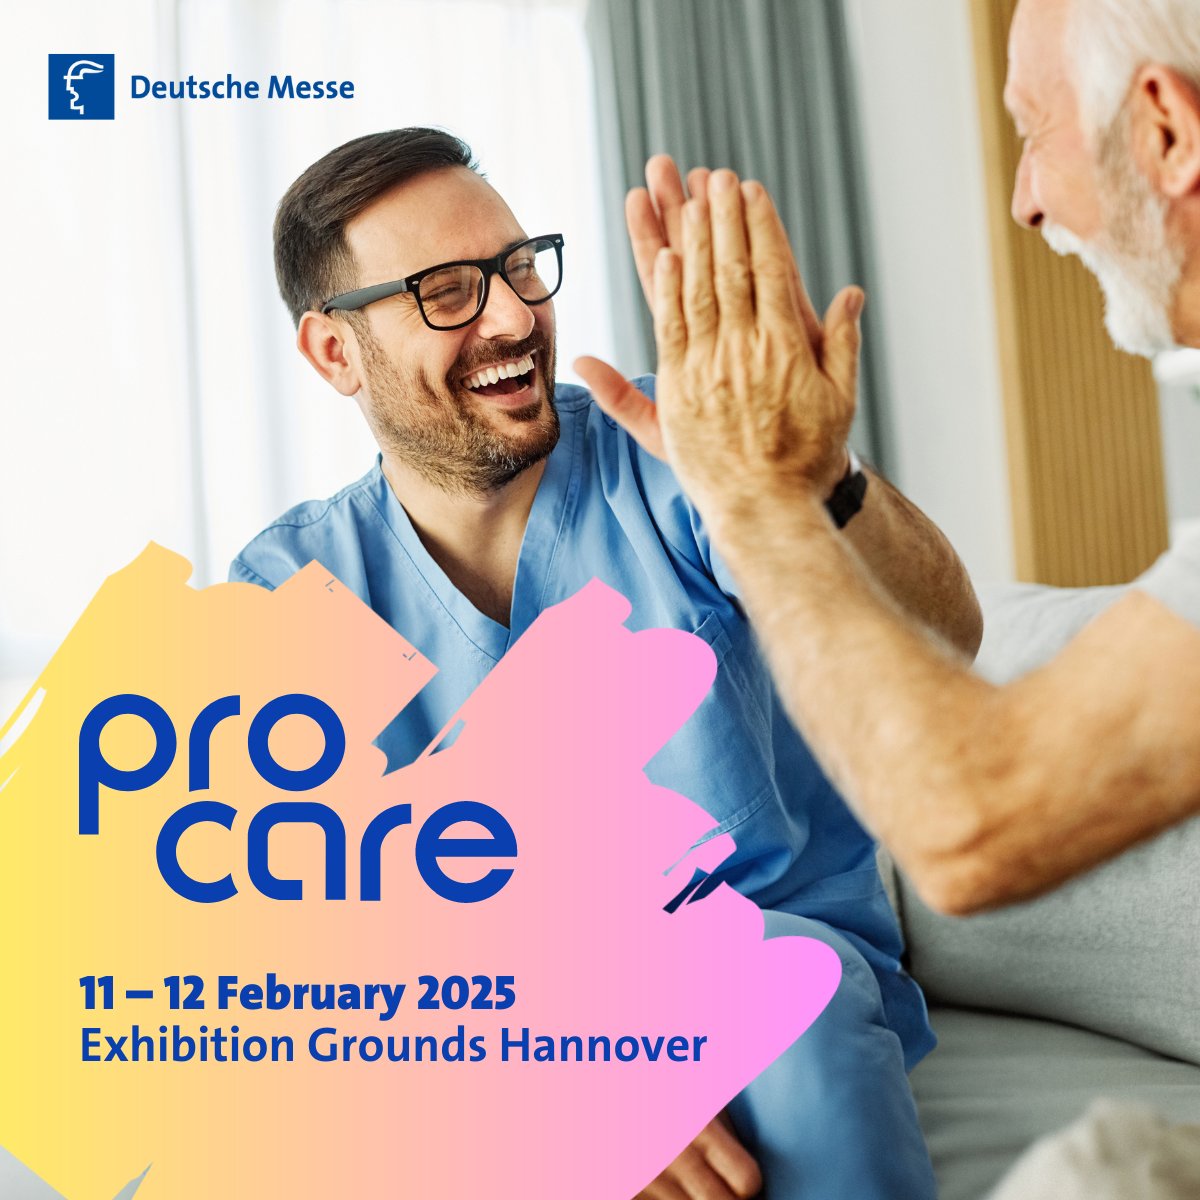 We are launching a new event! 📣 Pro Care is the name of our new trade fair format for the future of care. It covers all areas of care, including inpatient, intensive, outpatient and home care. More information 👉 pro-care-hannover.de/en/